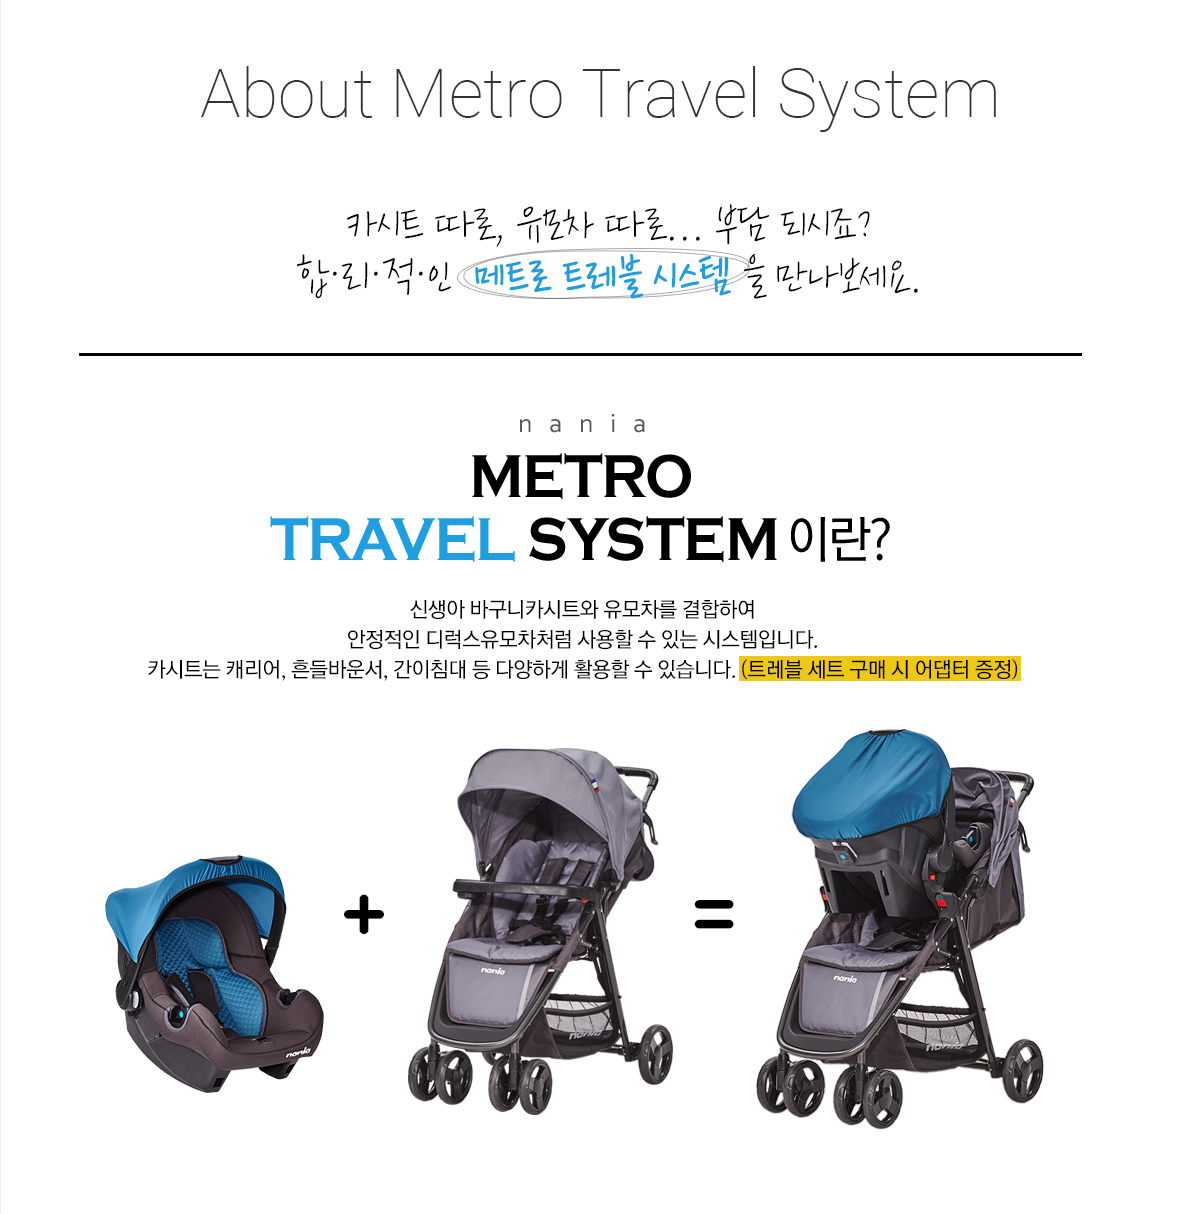 About Metro travel system